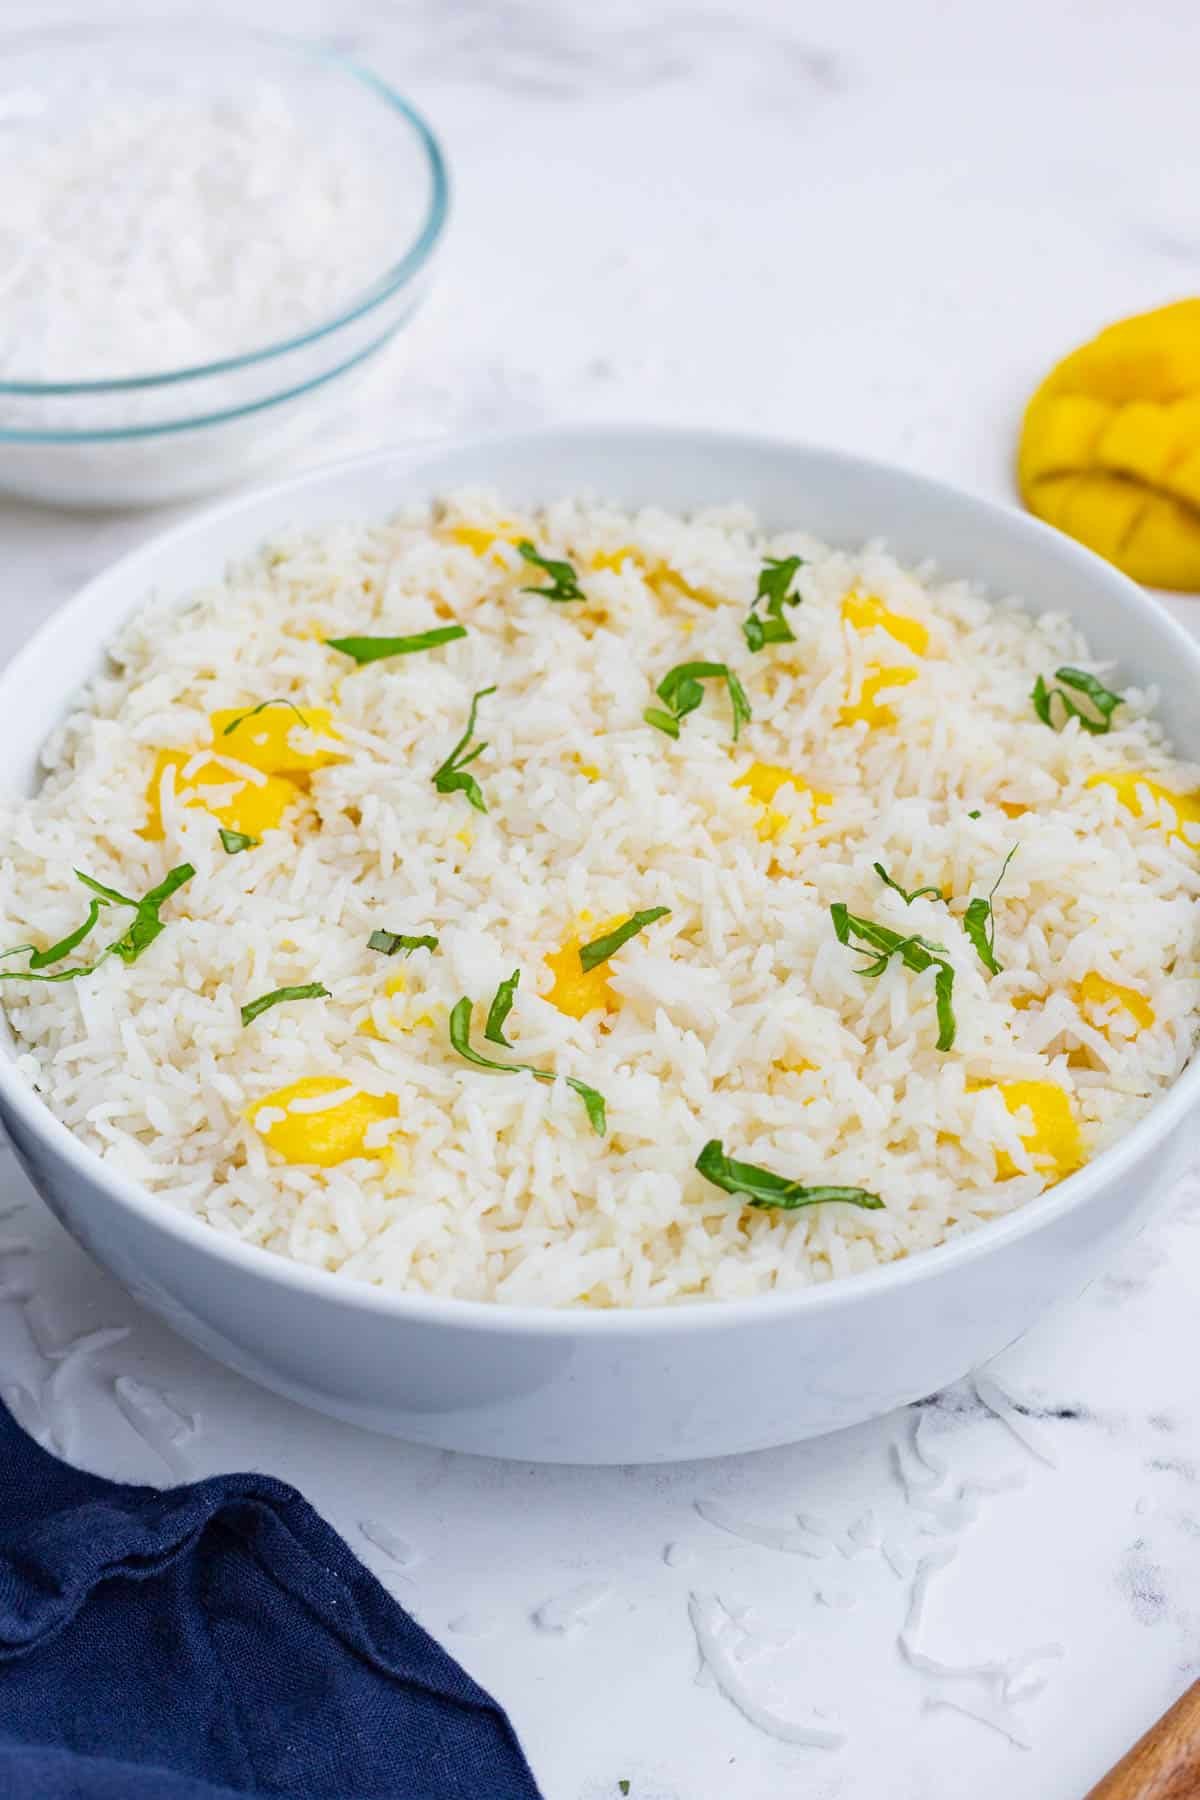 Serve up this mango coconut rice as a healthy side dish.